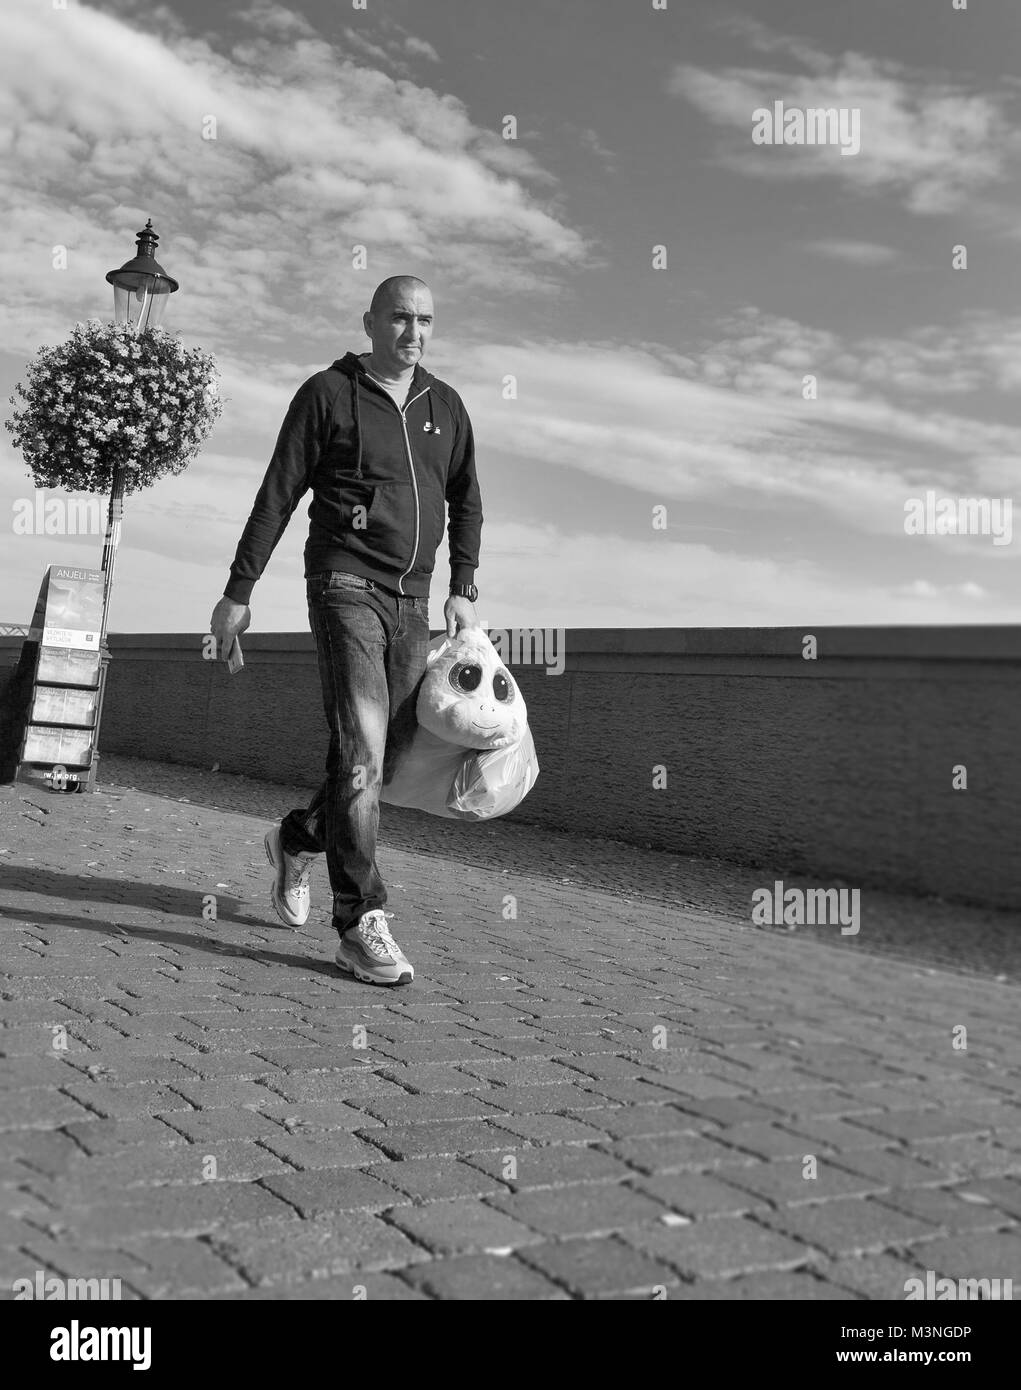 BRATISLAVA, SLOVAKIA - SEPTEMBER 26, 2017: Unrecognized man carries a strange toy over Danube river promenade. With a population of about 450 000, Bra Stock Photo